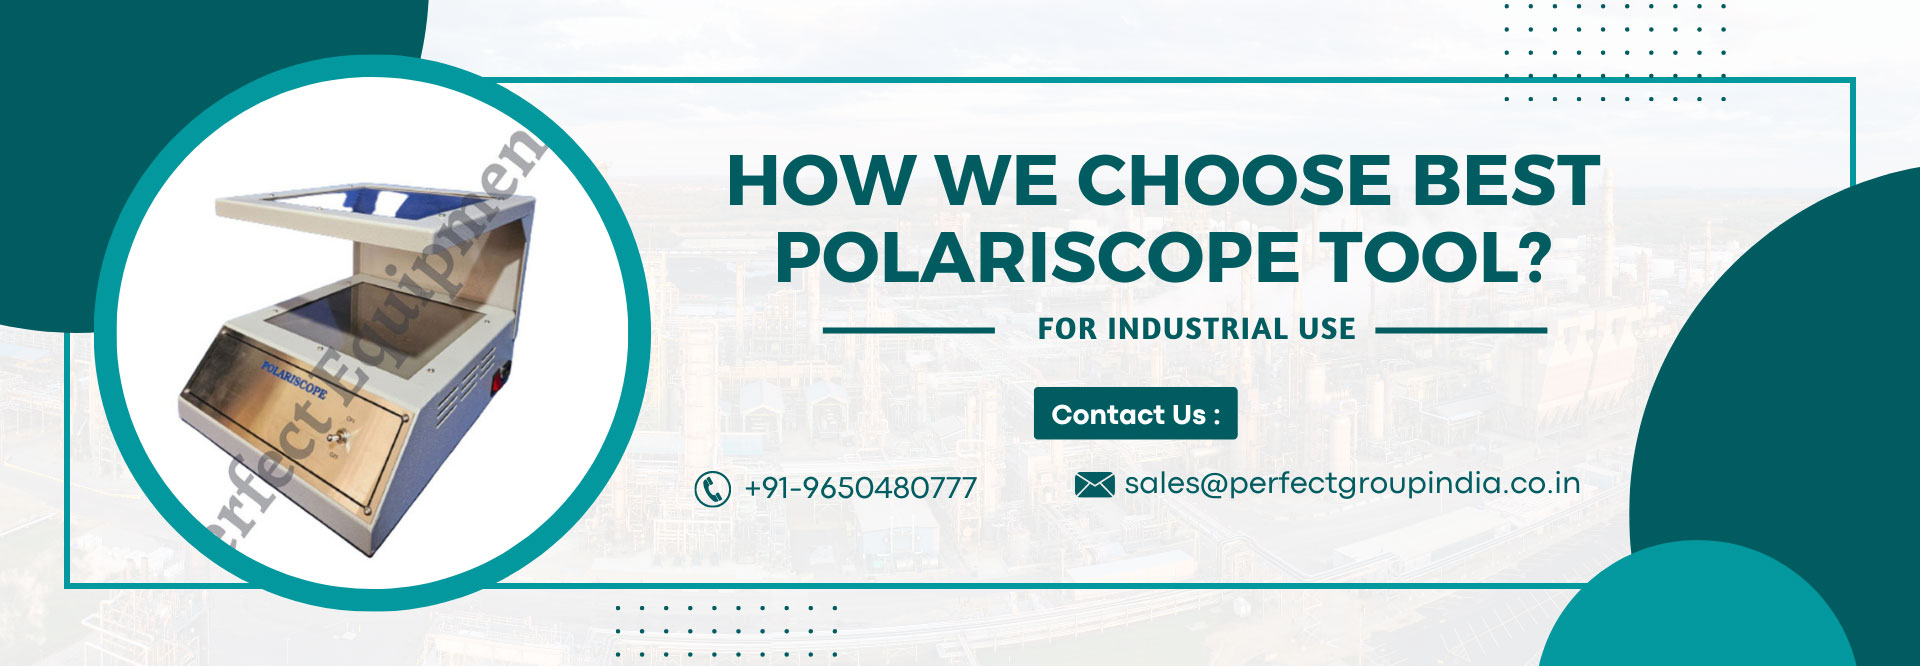 How We Choose The Best Polariscope?